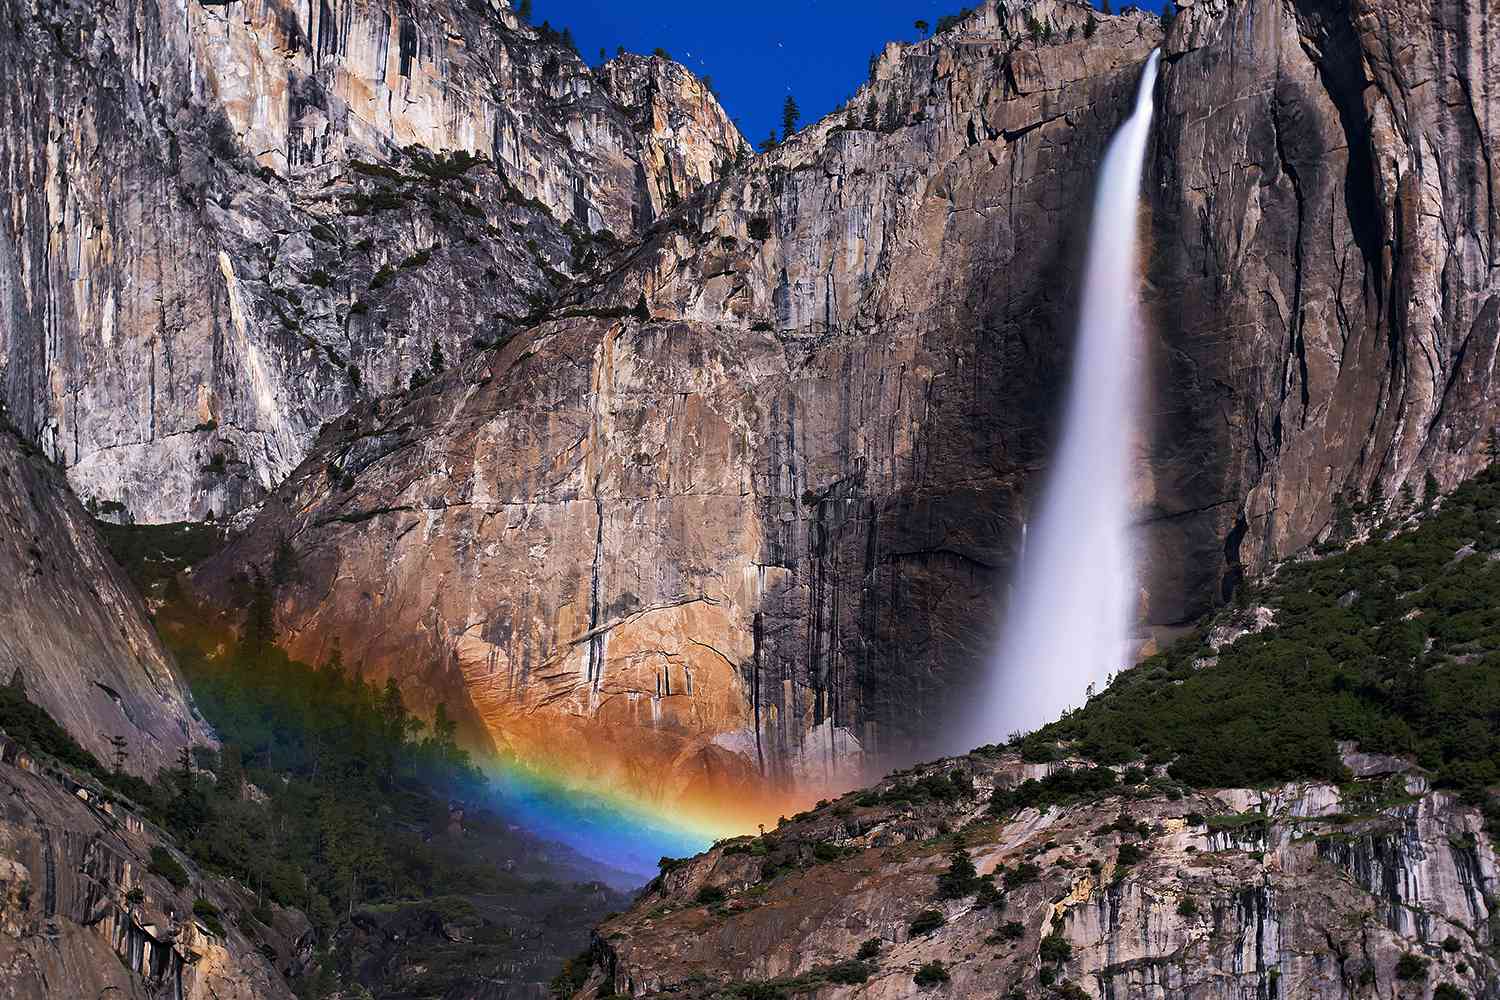 Spectacular Lunar Rainbows, Also Known as Moonbows, Spotted at Yosemite Falls — See the Video!